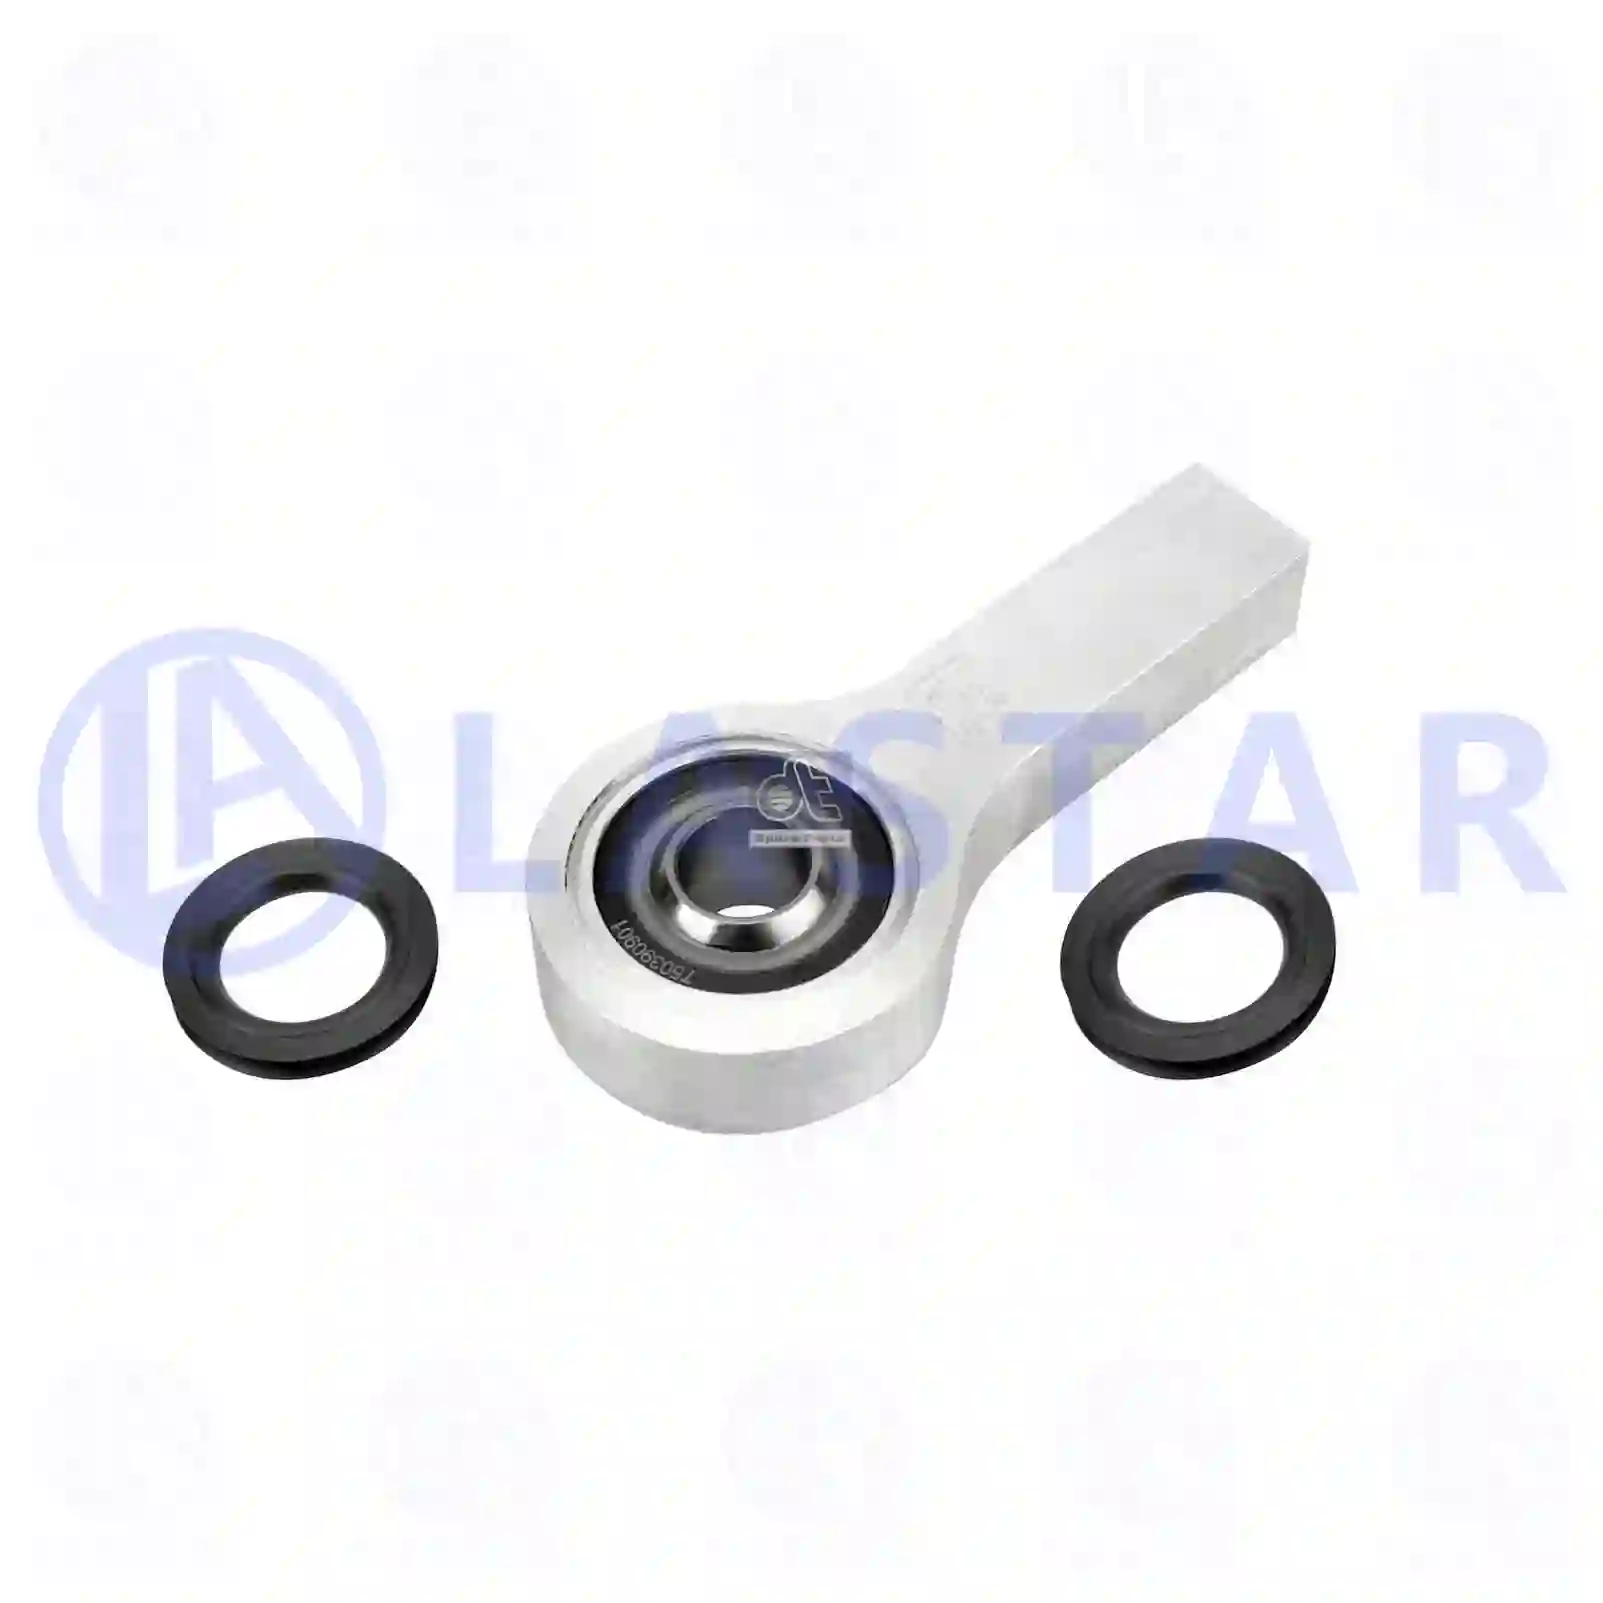  Bearing joint, complete with seal rings || Lastar Spare Part | Truck Spare Parts, Auotomotive Spare Parts